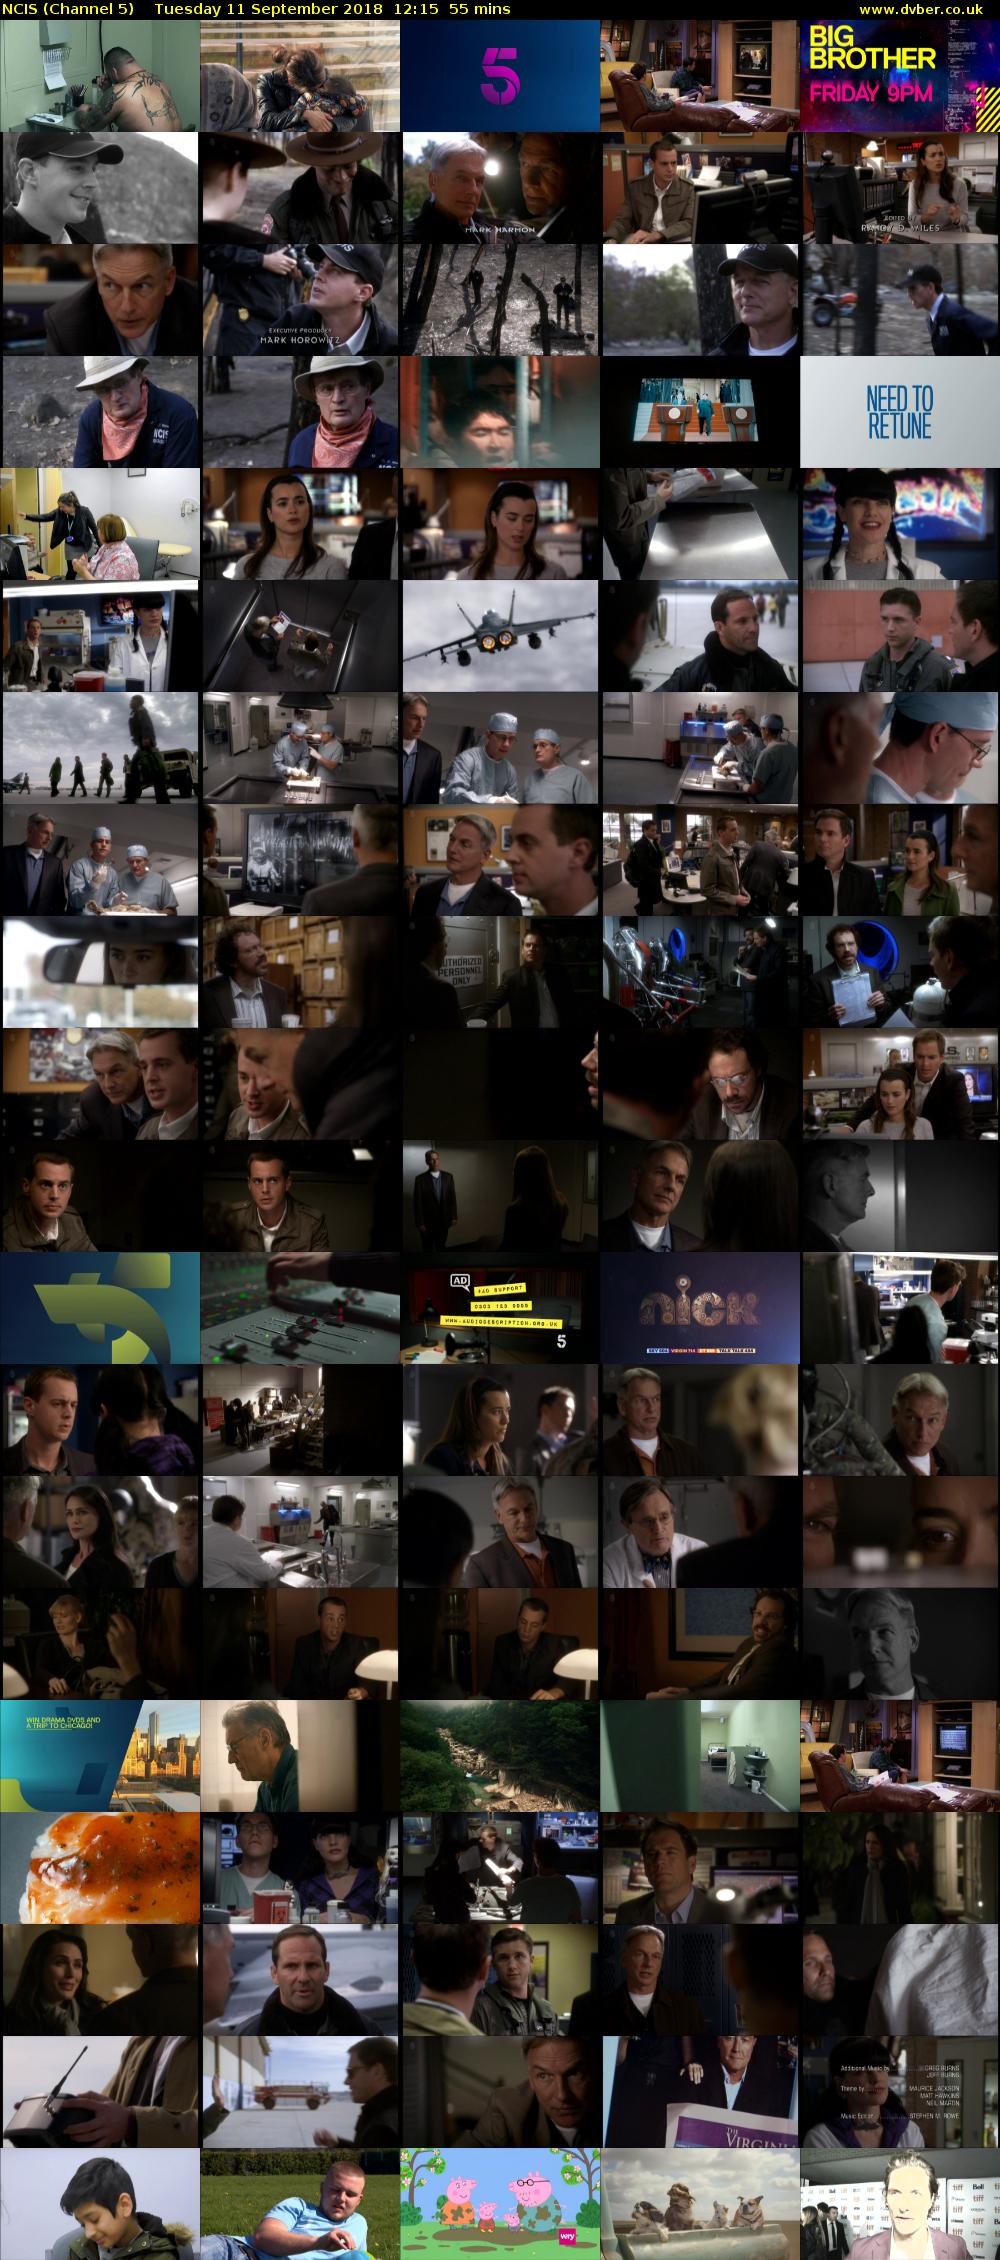 NCIS (Channel 5) Tuesday 11 September 2018 12:15 - 13:10